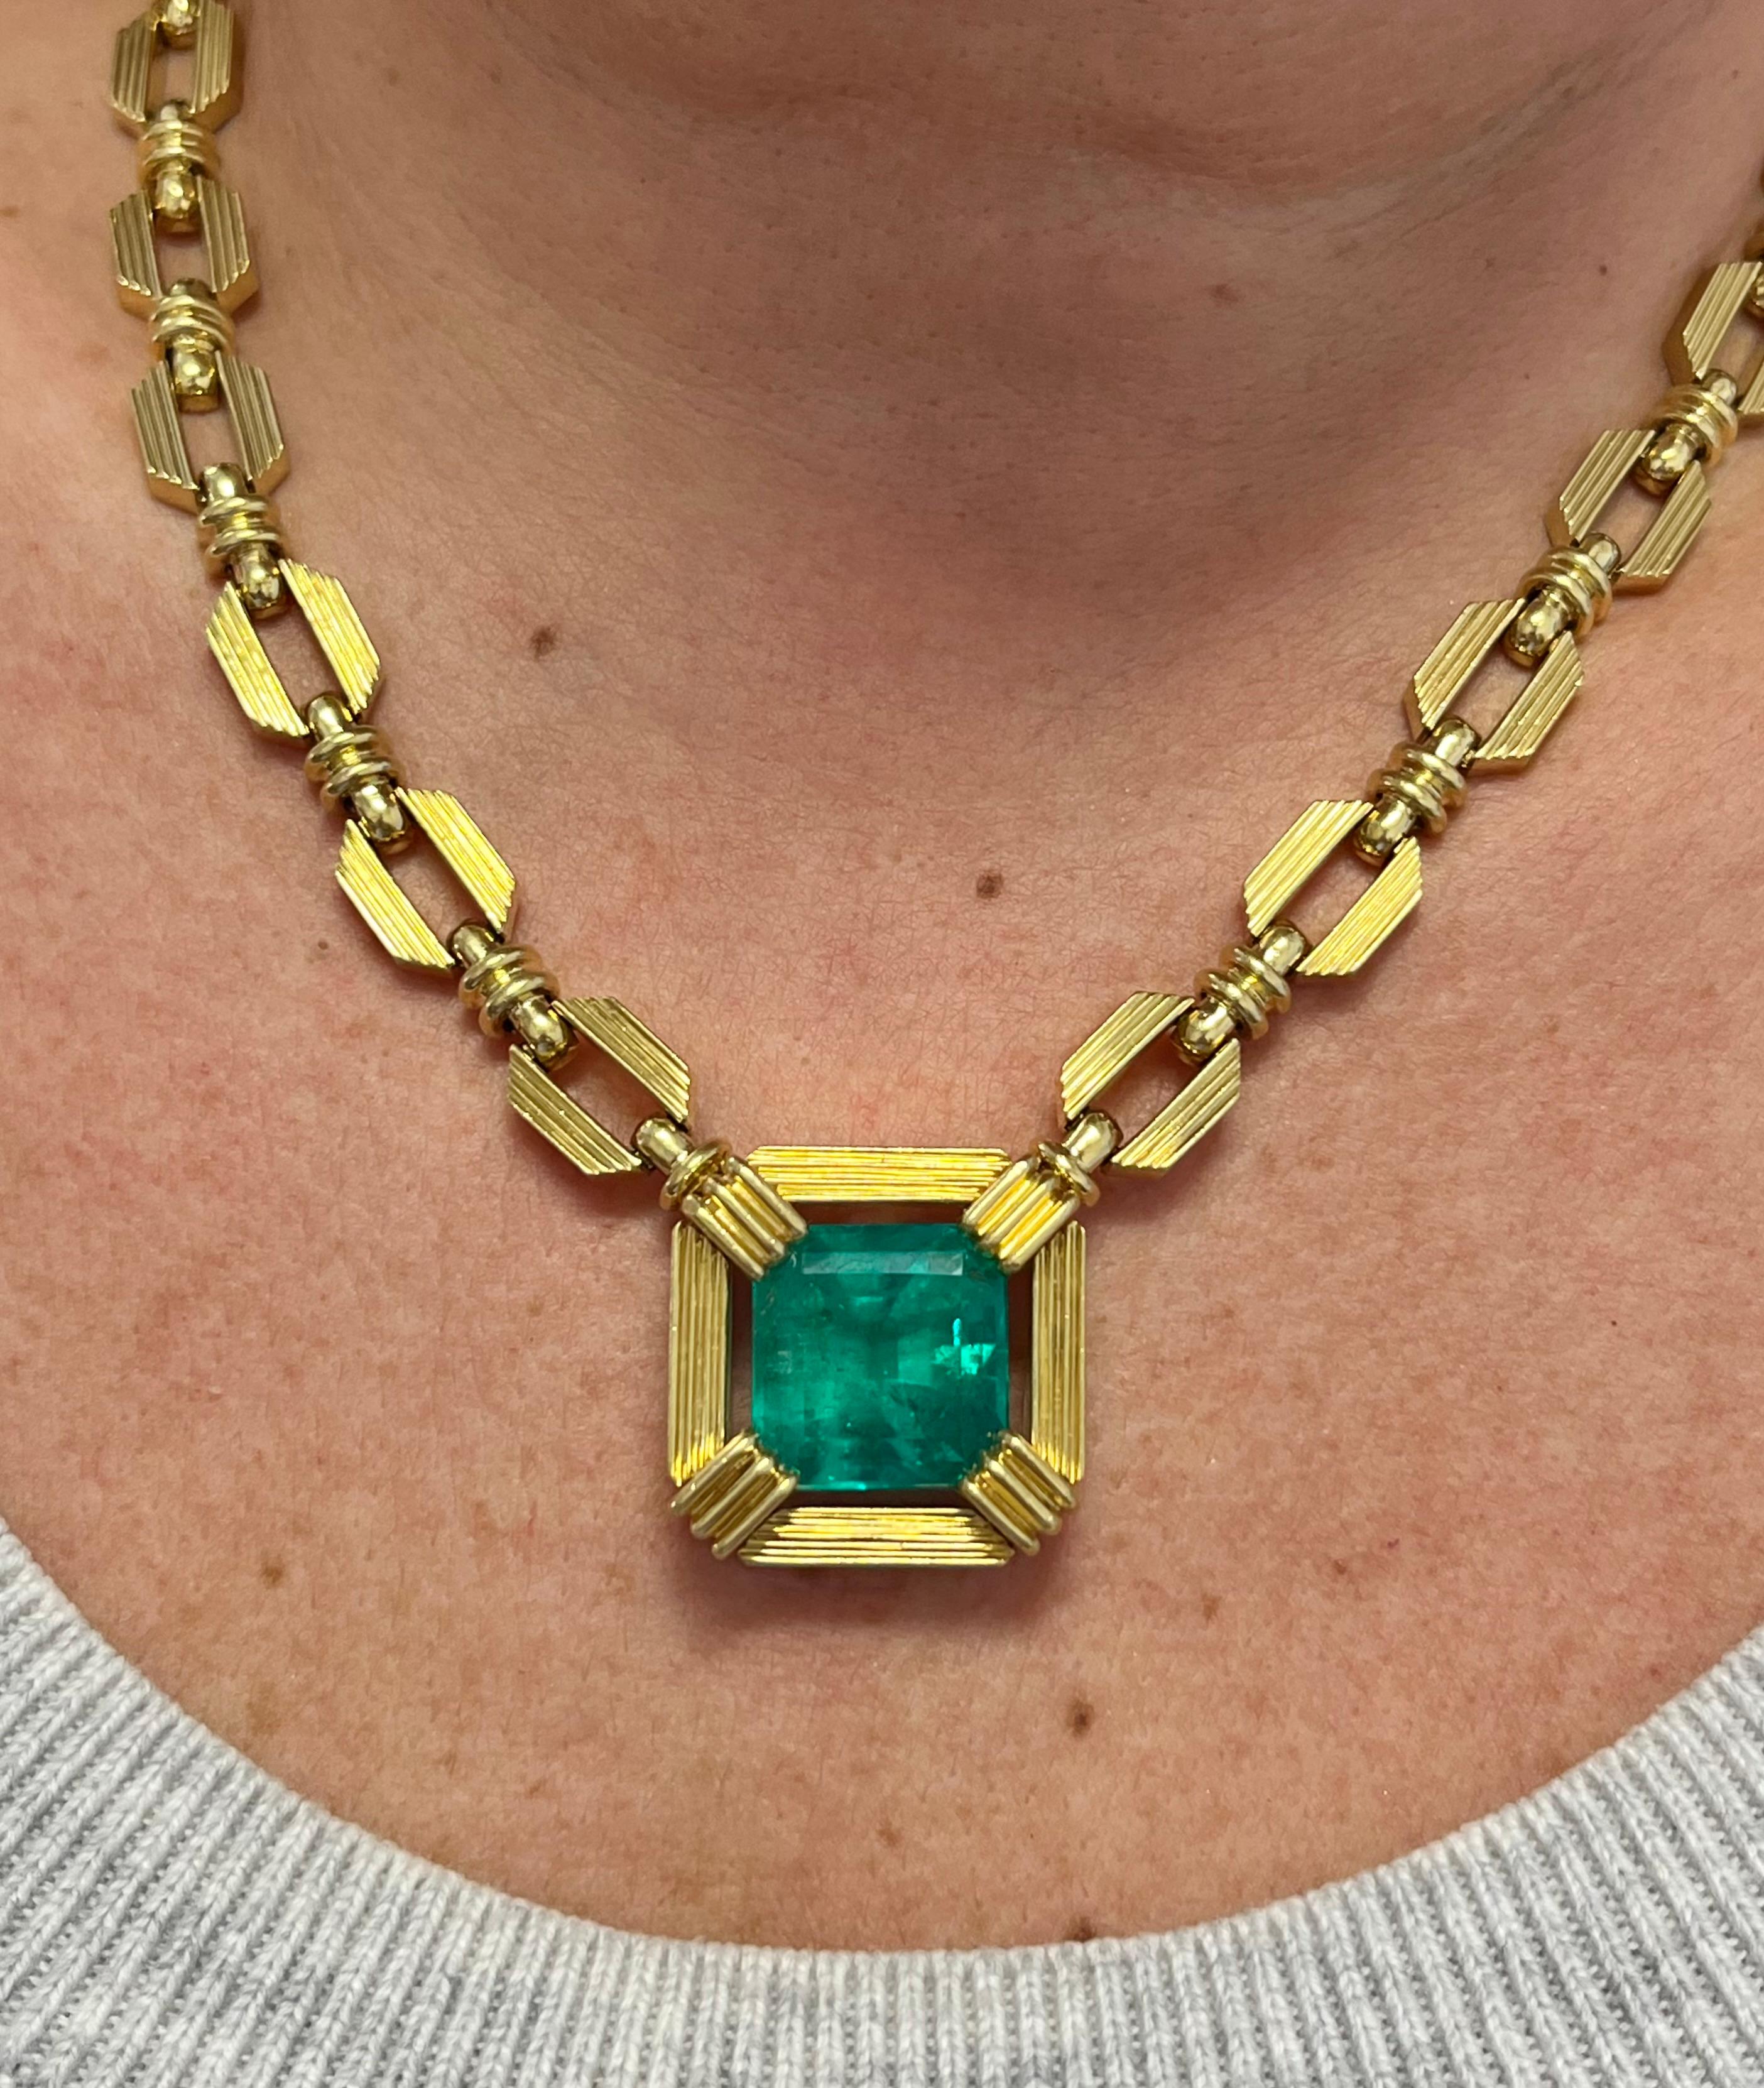 Henry Dunay Signed 19.48 Carat Colombian Emerald Necklace in 18k Yellow Gold For Sale 2